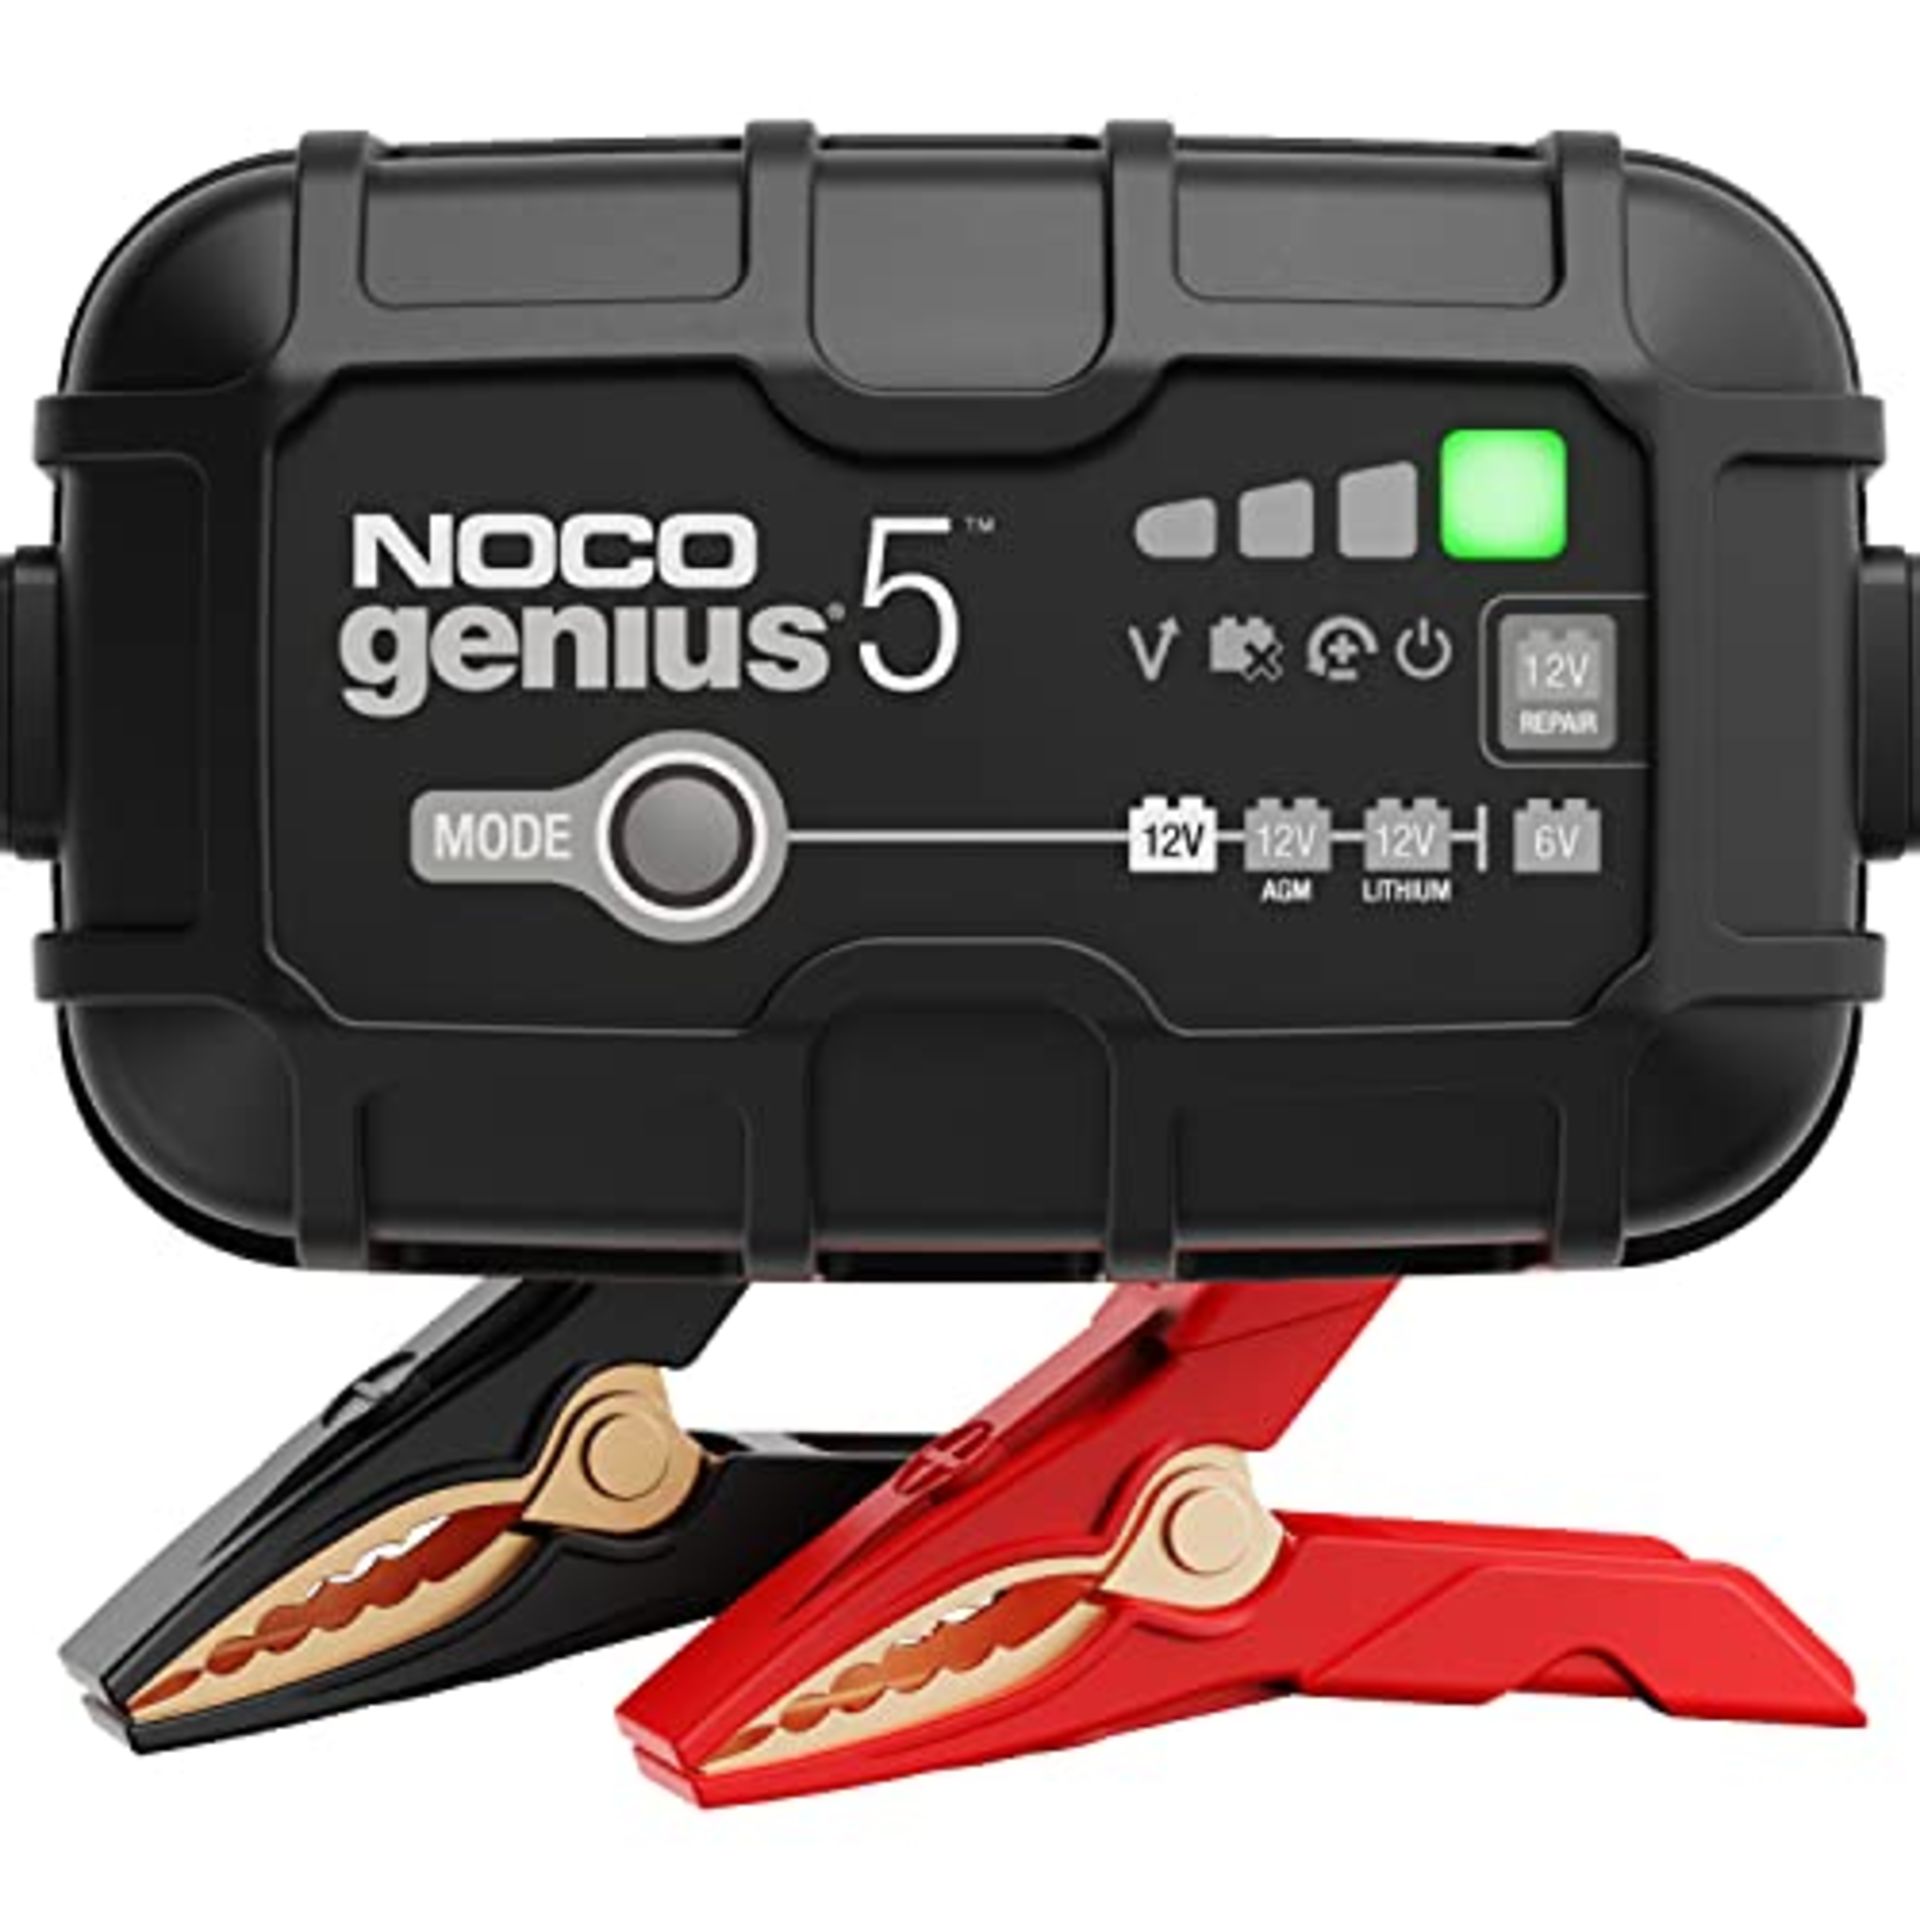 RRP £79.00 NOCO GENIUS5UK, 5A Car Battery Charger, 6V and 12V Portable Smart Charger, Battery Mai - Image 5 of 10